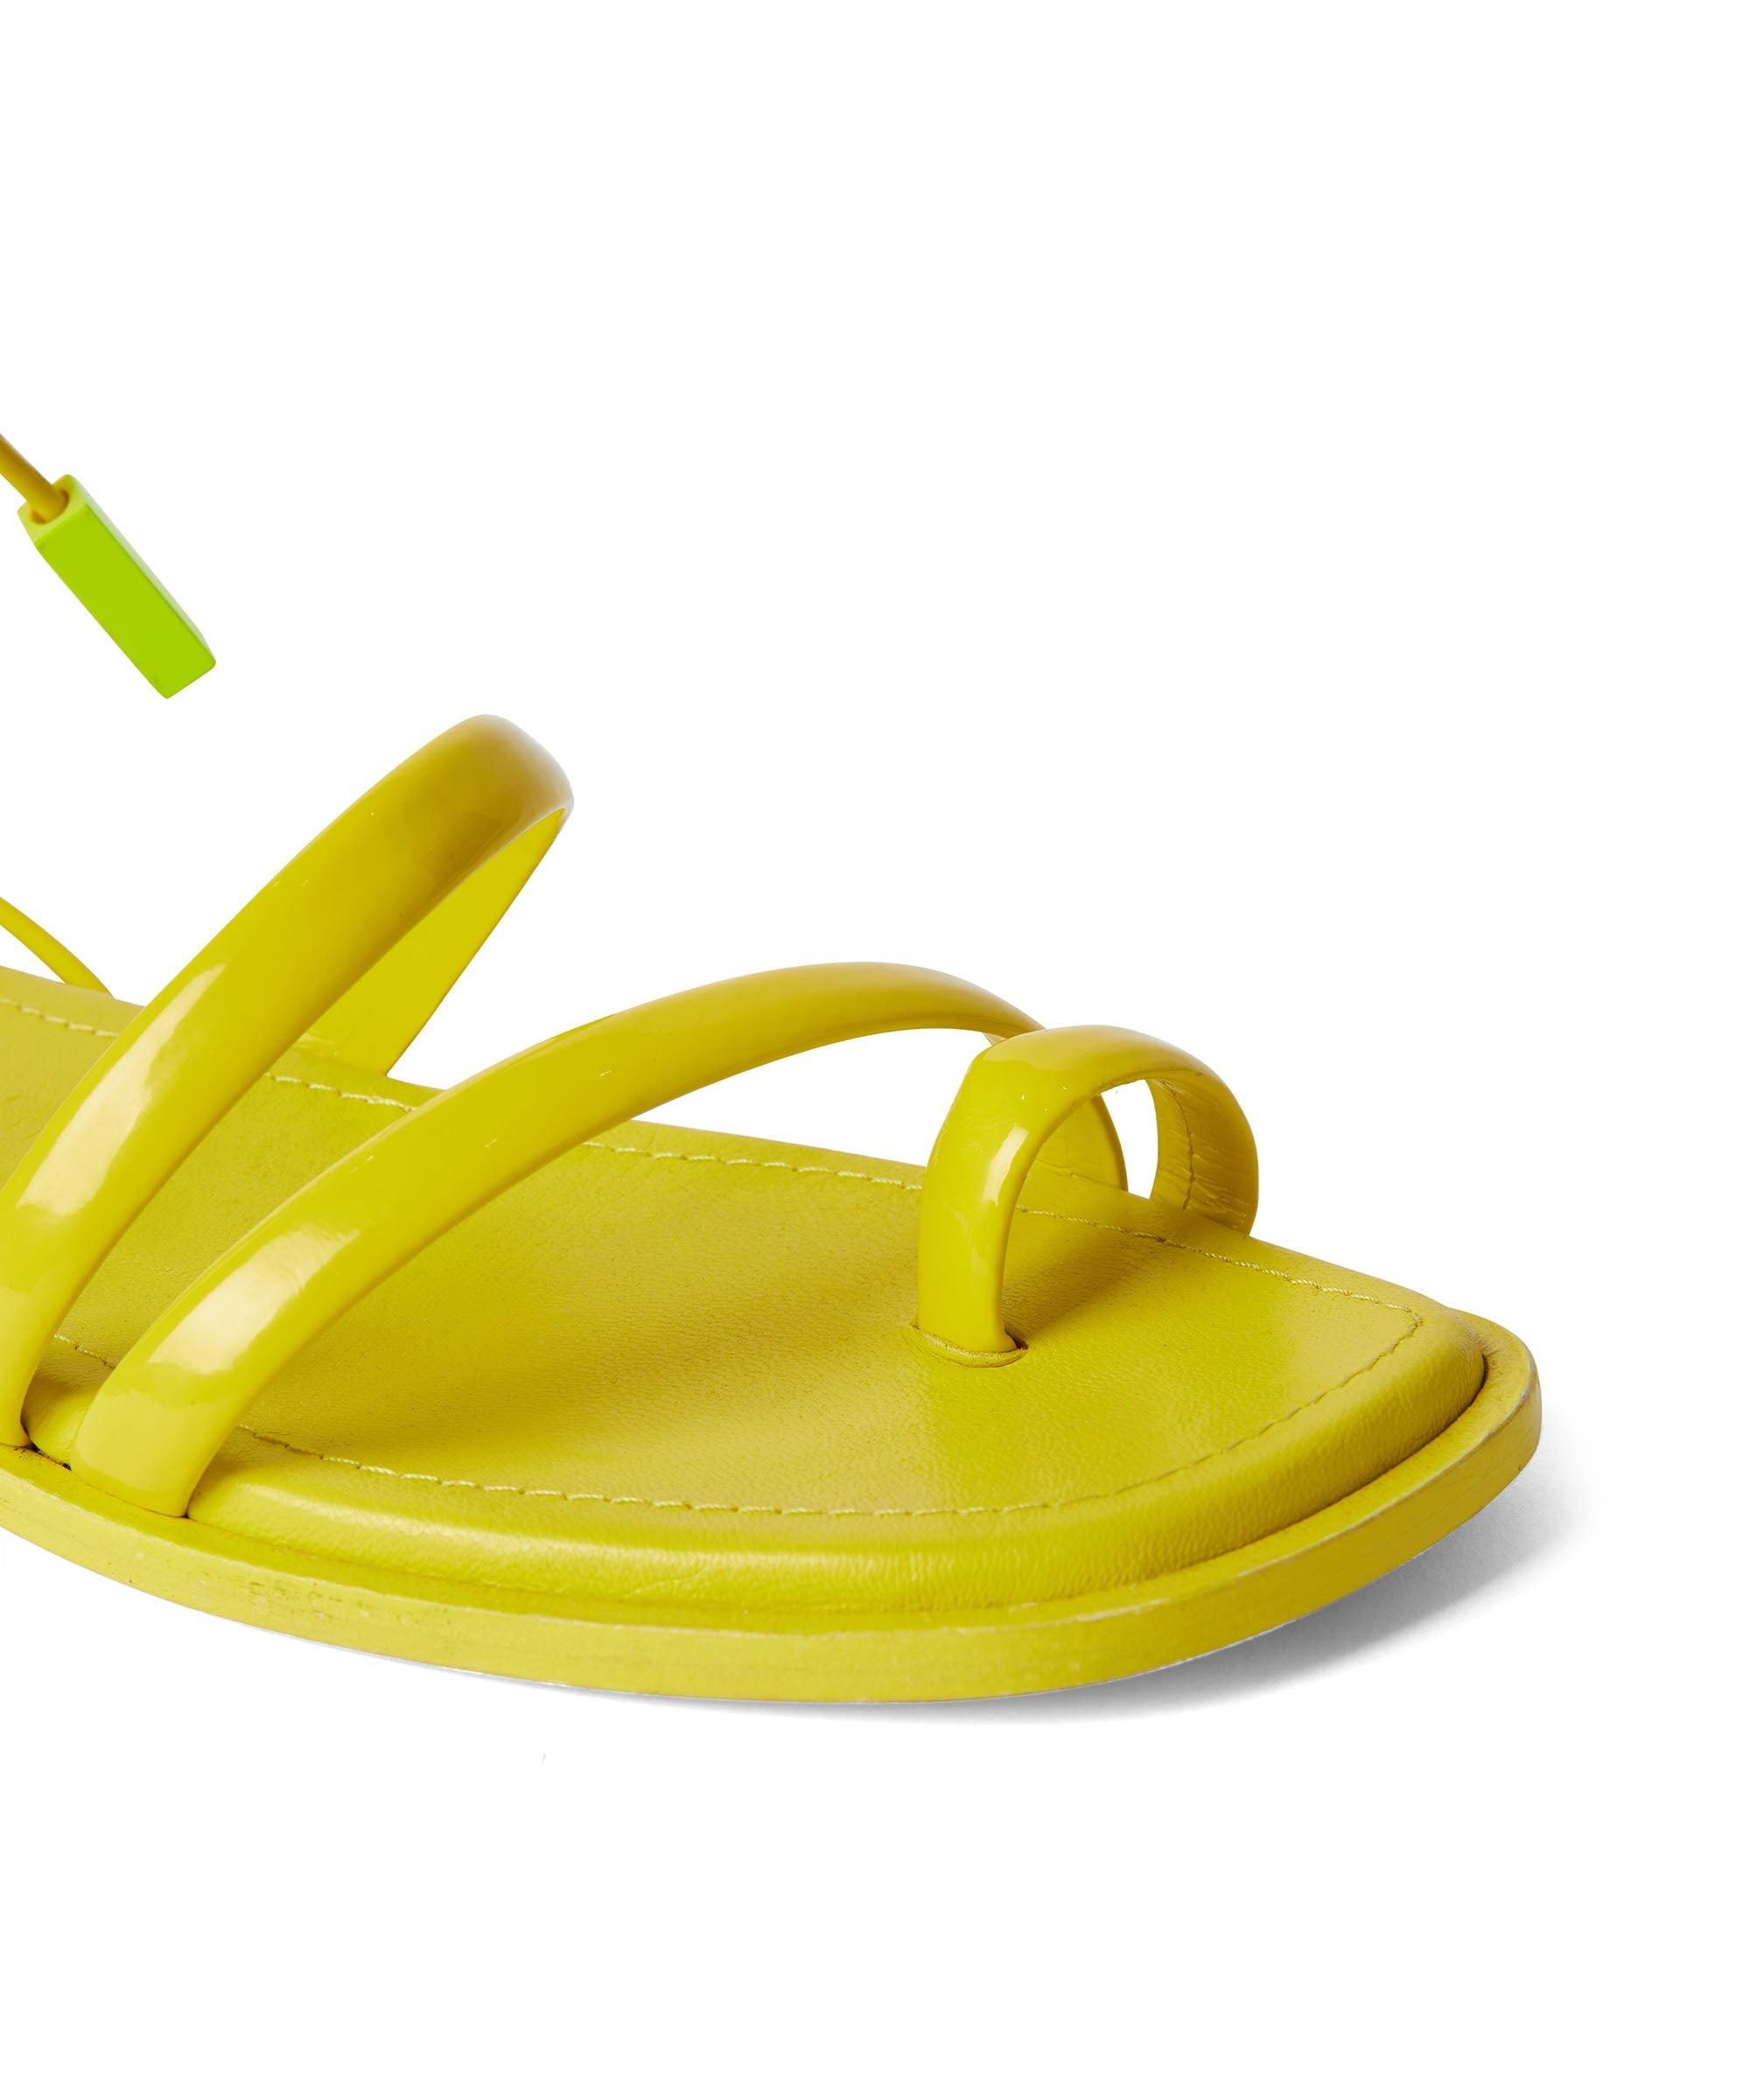 Low sandals with patent leather straps - 4